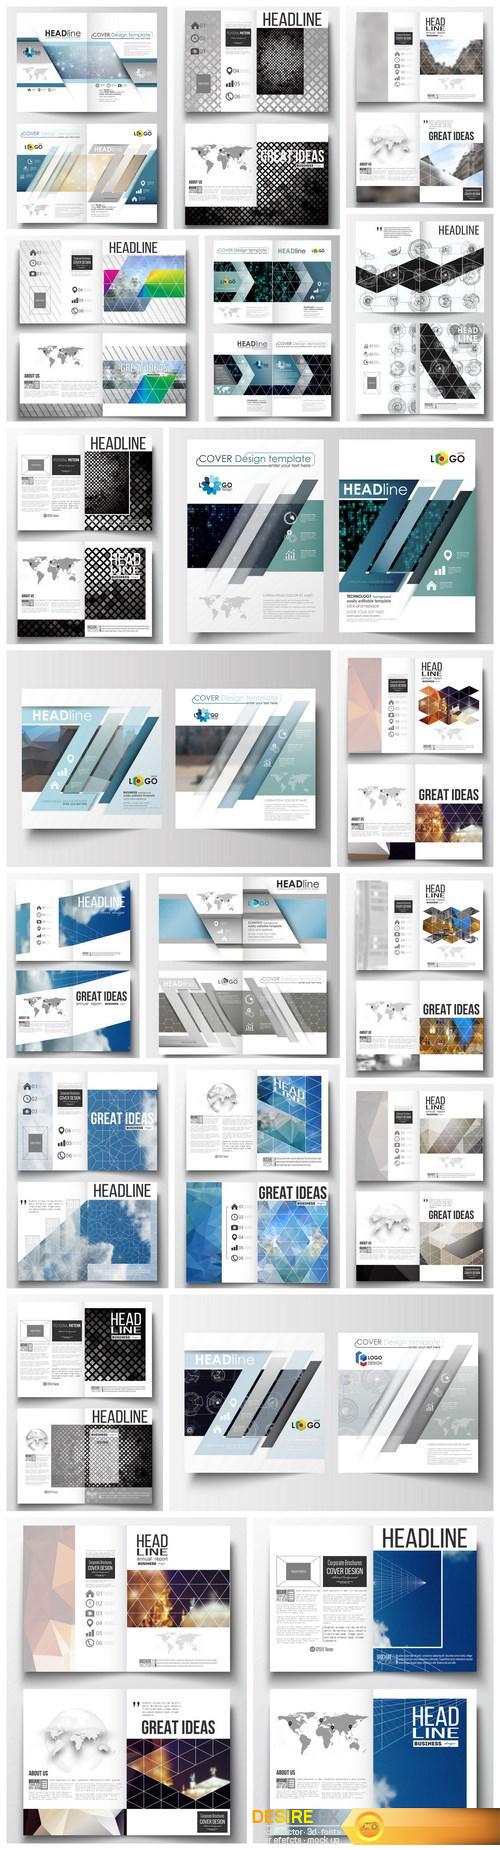 Cover design template, magazine, flyer, booklet or annual report 2 - 20xEPS Vector Stock